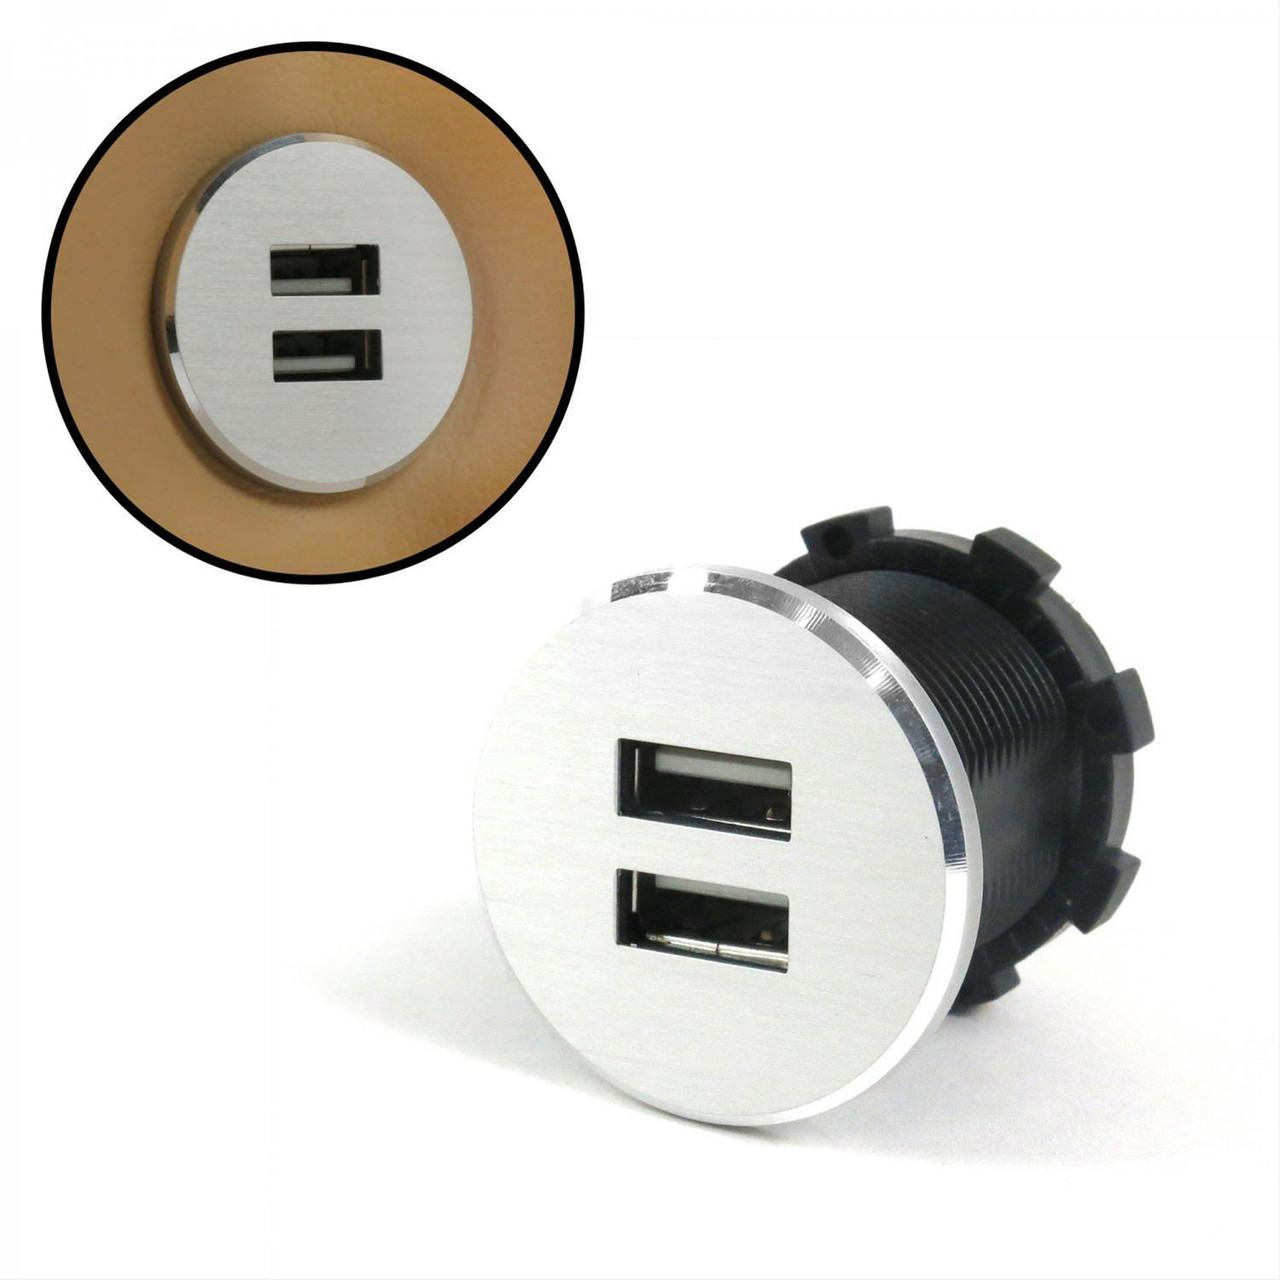 Silver Dash Mount Dual Port USB Charger